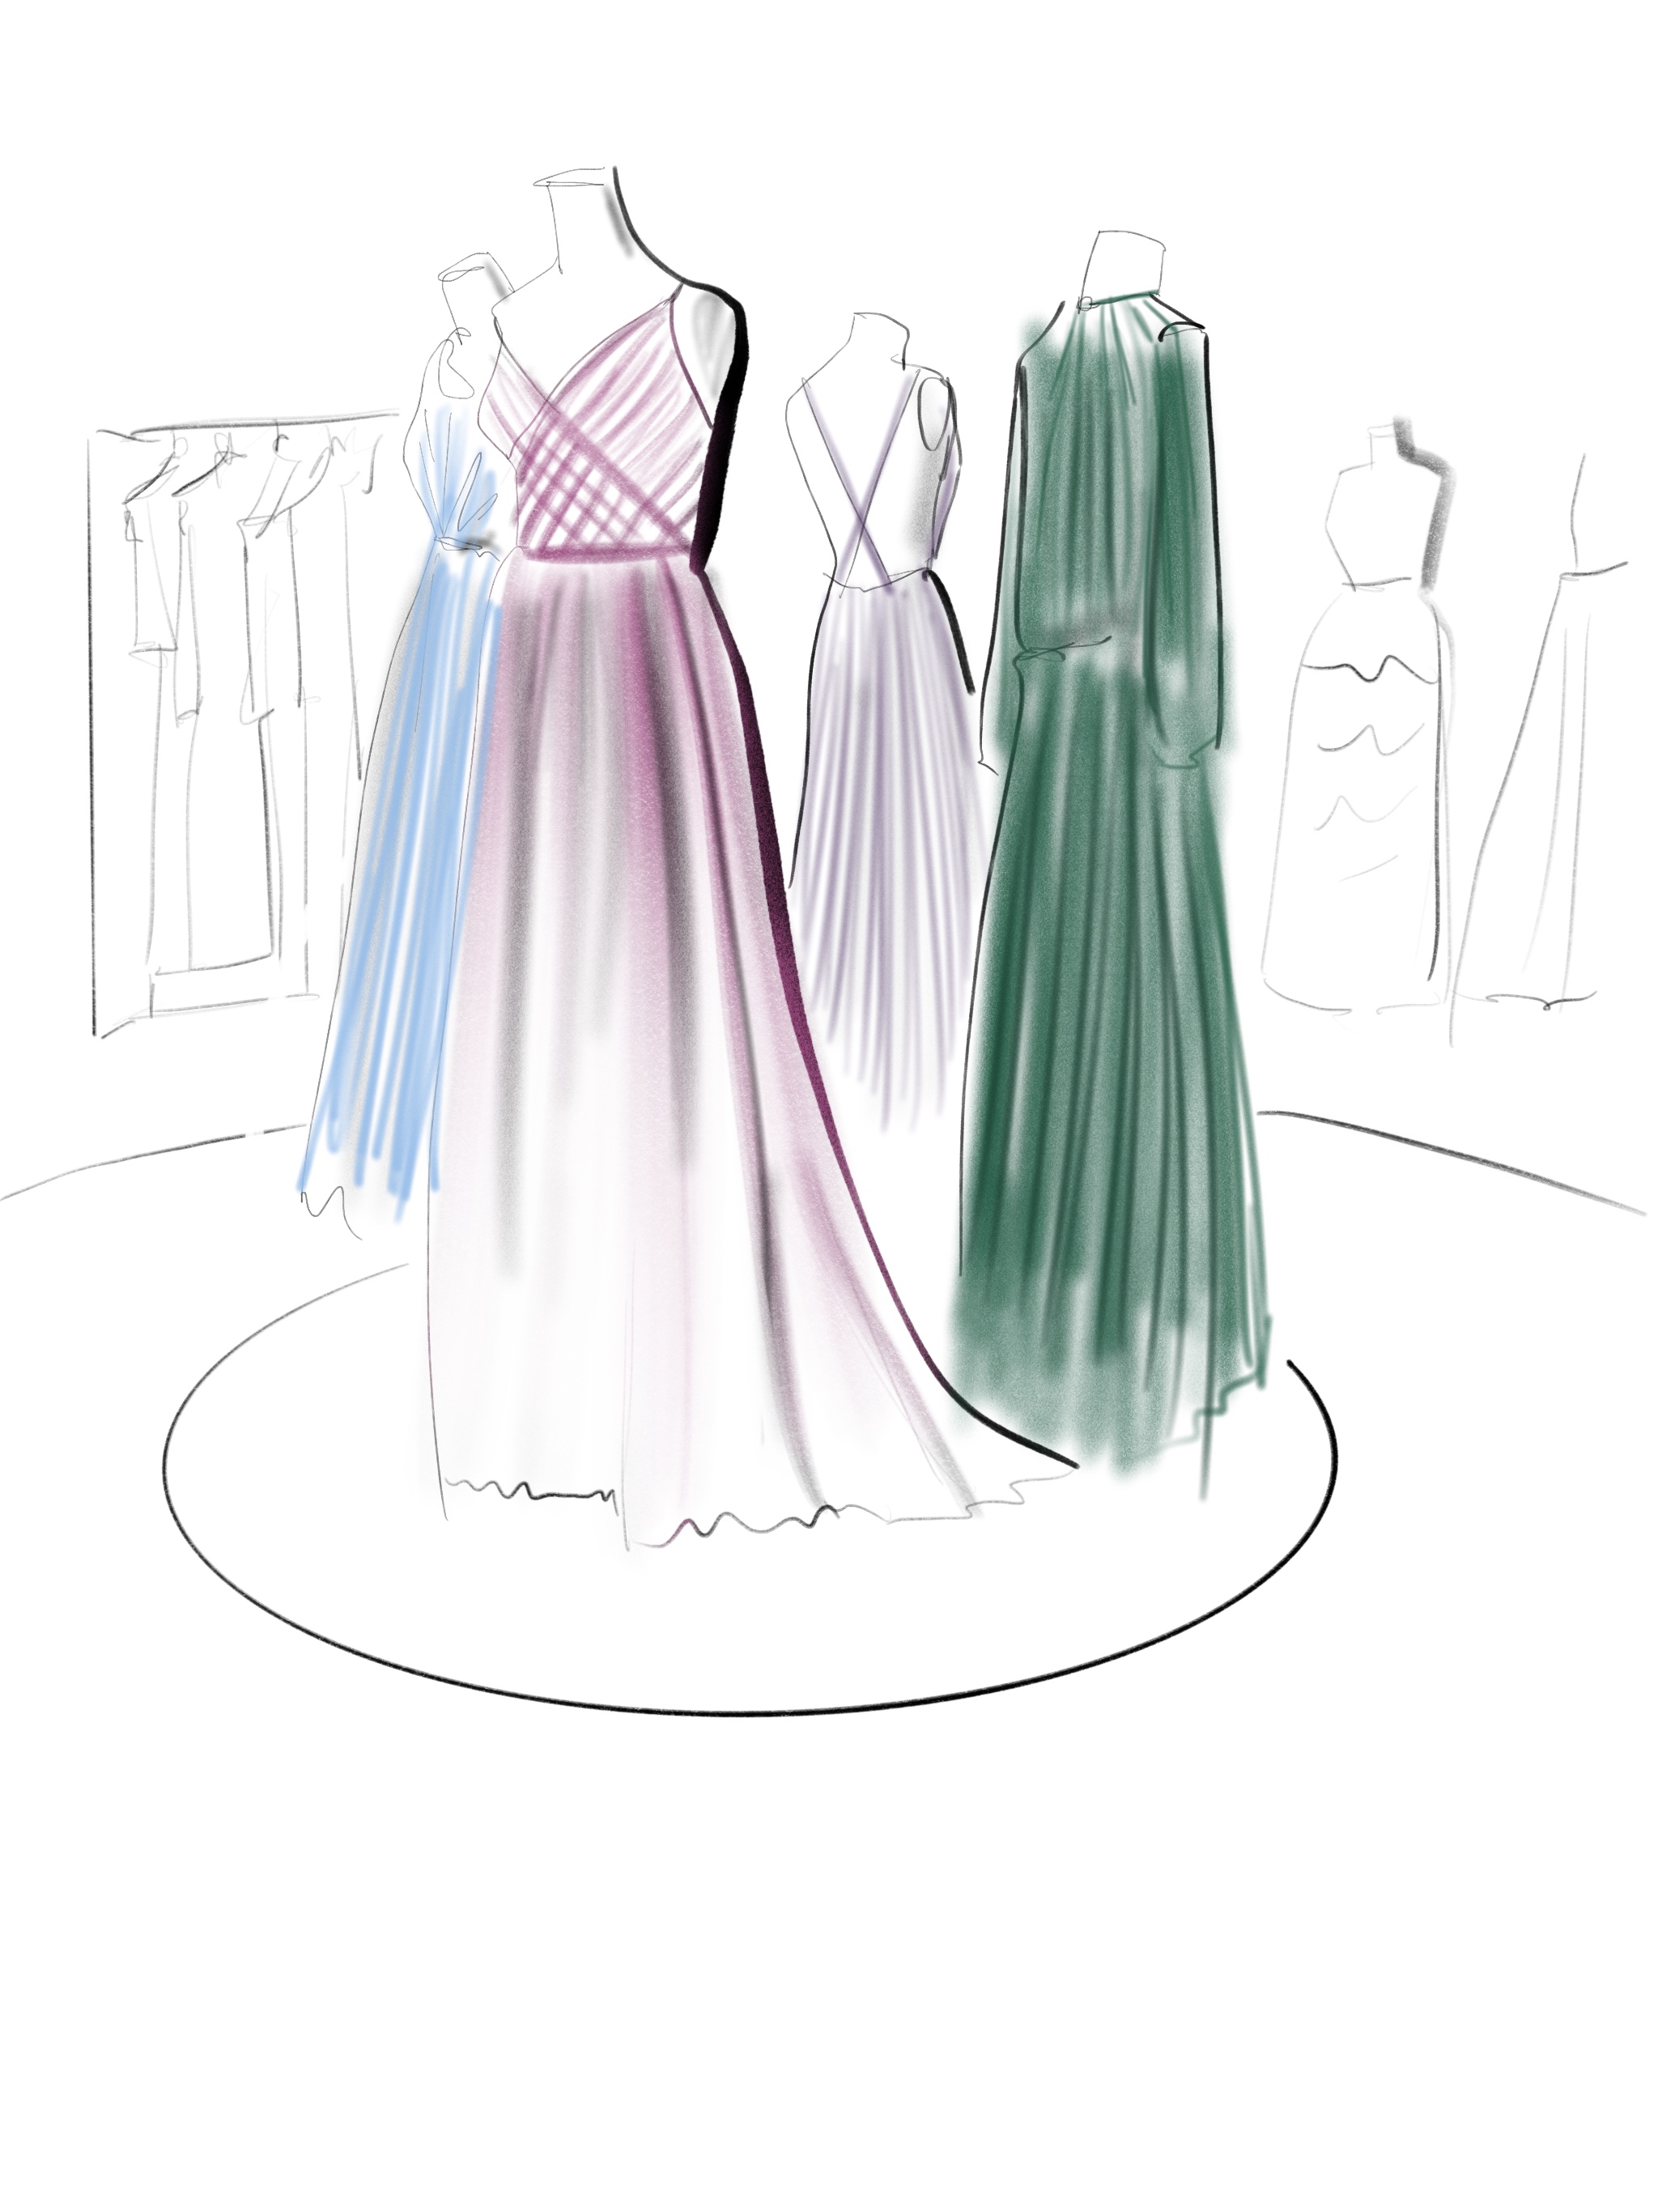 live-drawing-dior 19